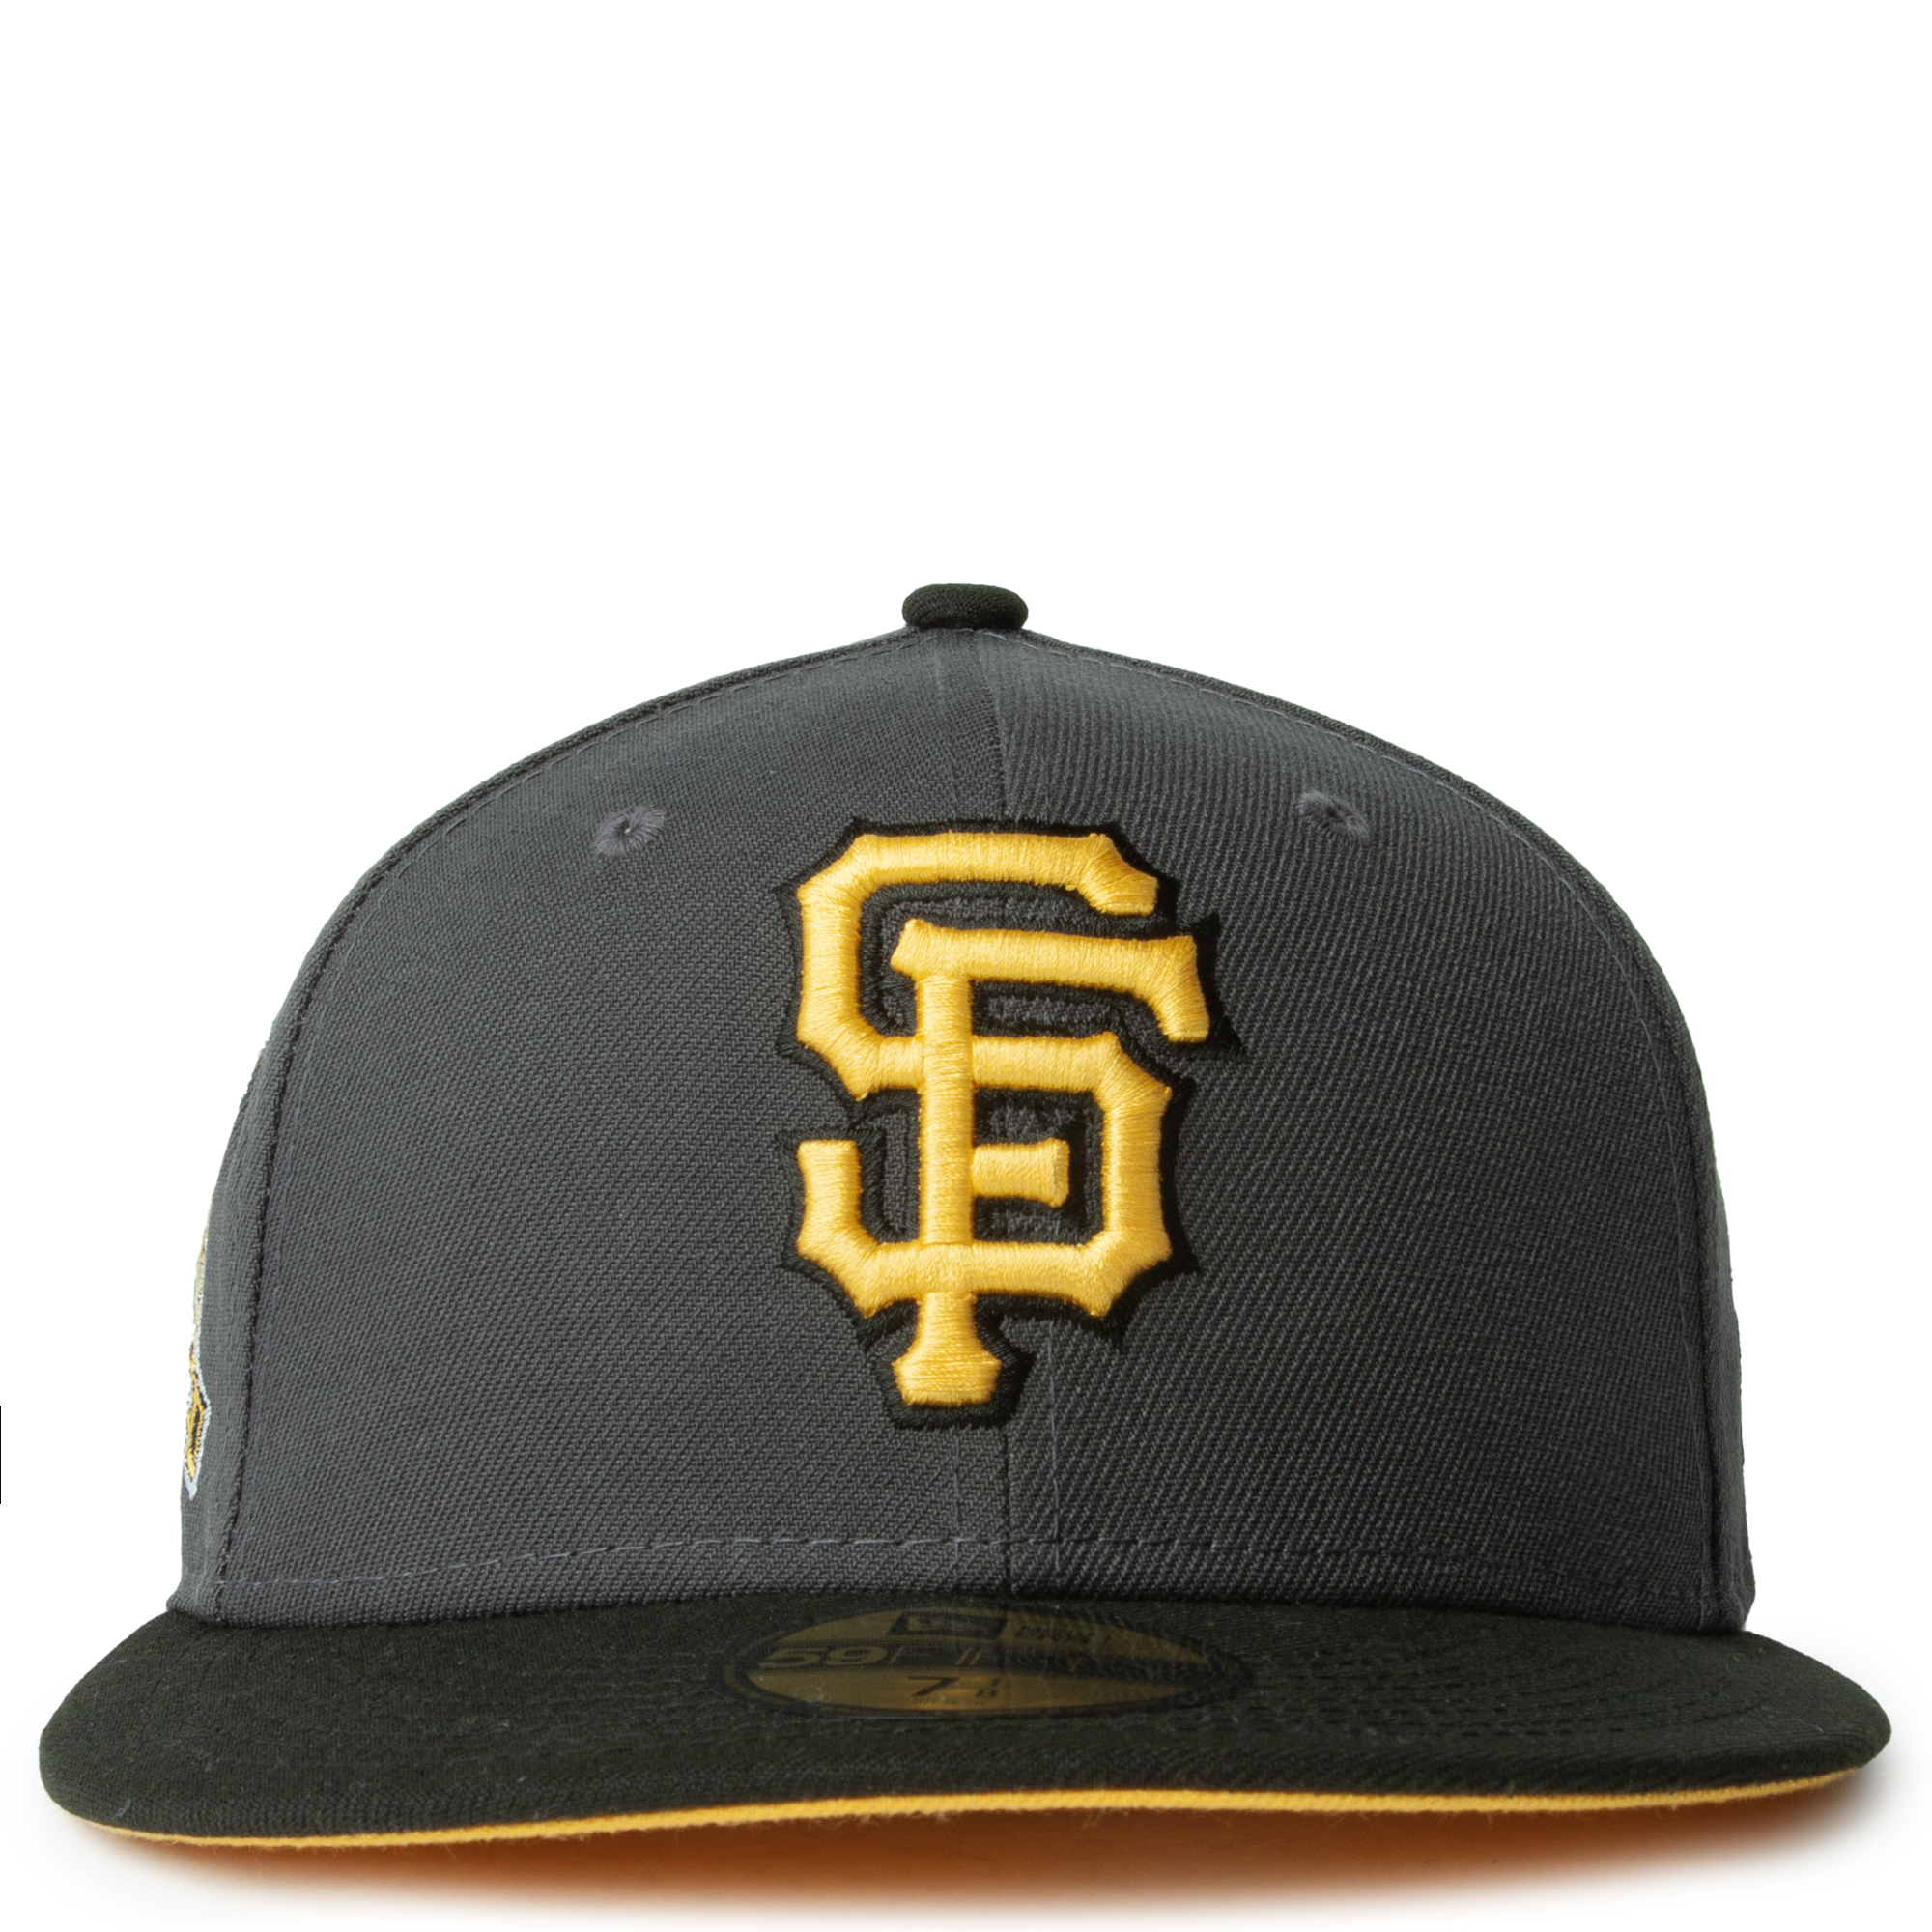 SAN FRANCISCO GIANTS BLACK GRAY 59FIFTY FITTED HAT 70740312